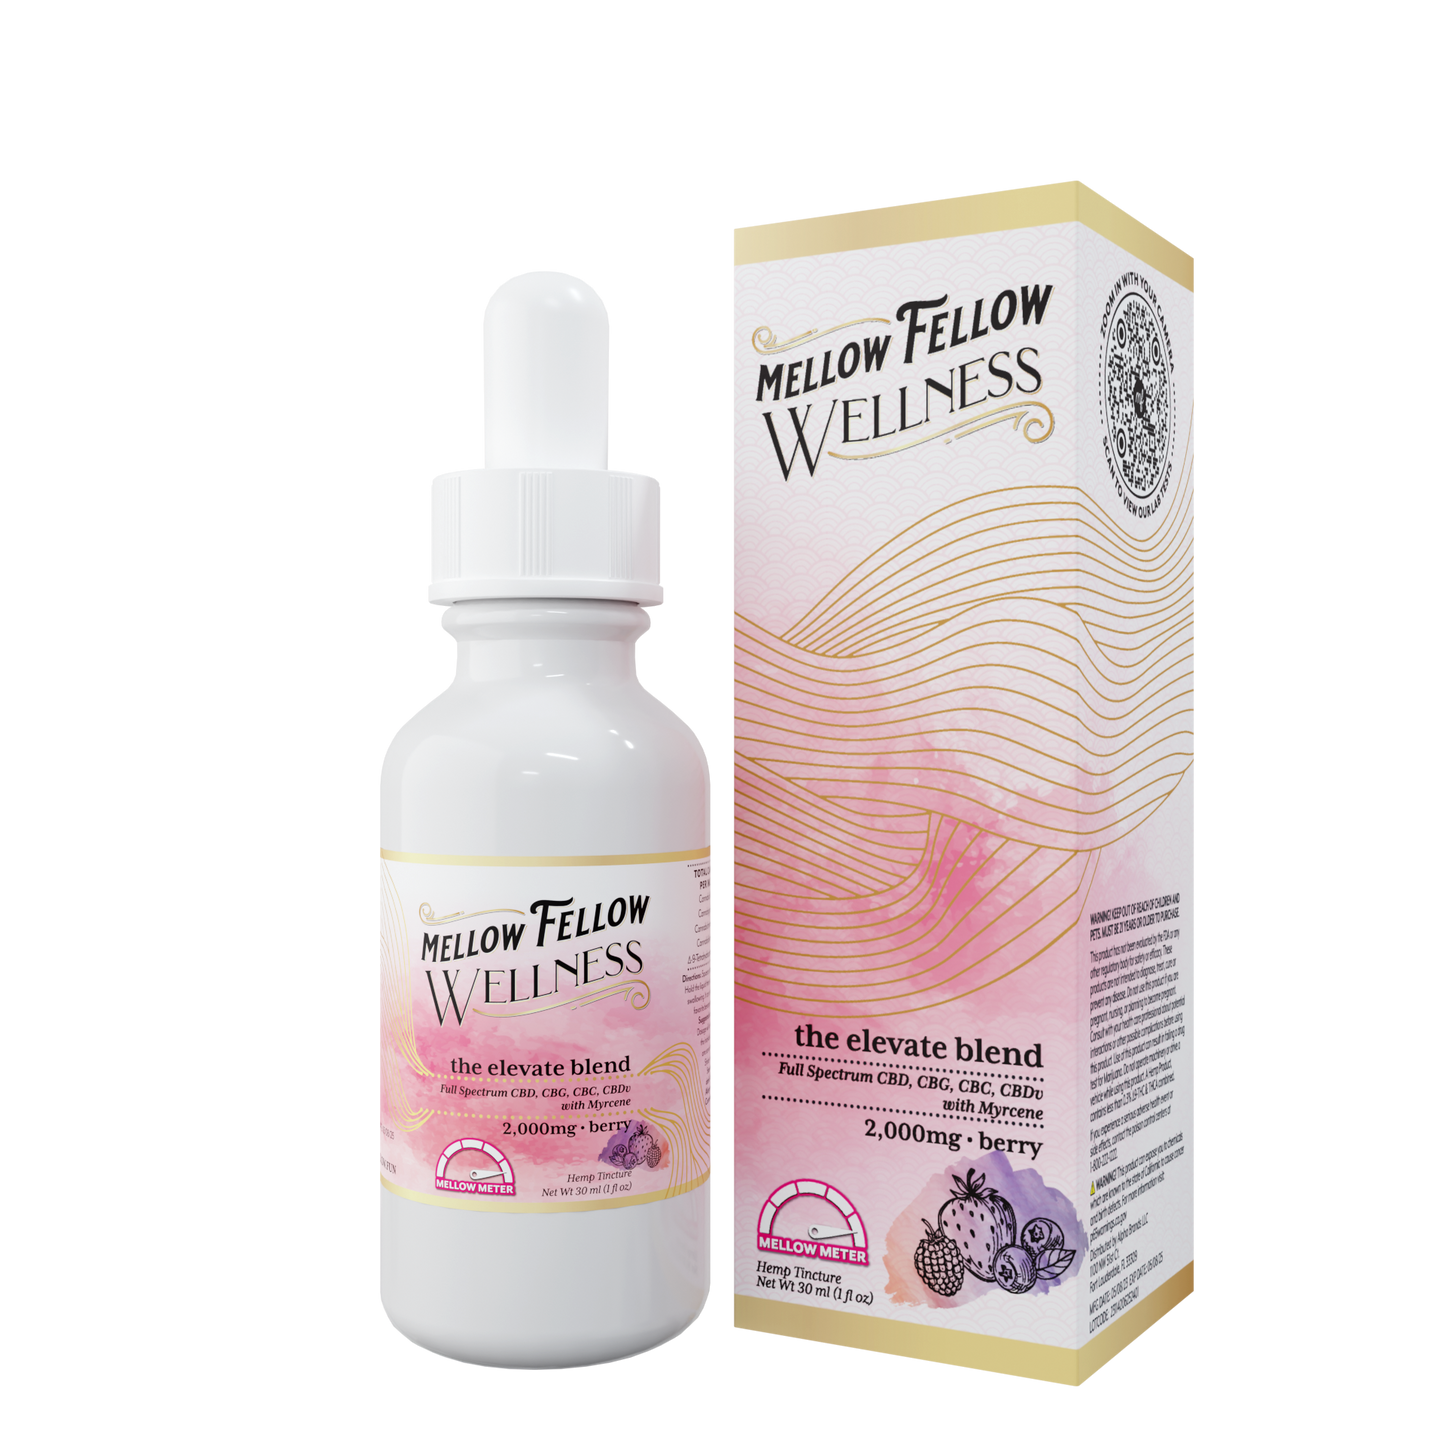 Mellow Fellow Wellness Tincture - Elevate Blend - Berry - 2000mg Best Sales Price - Edibles